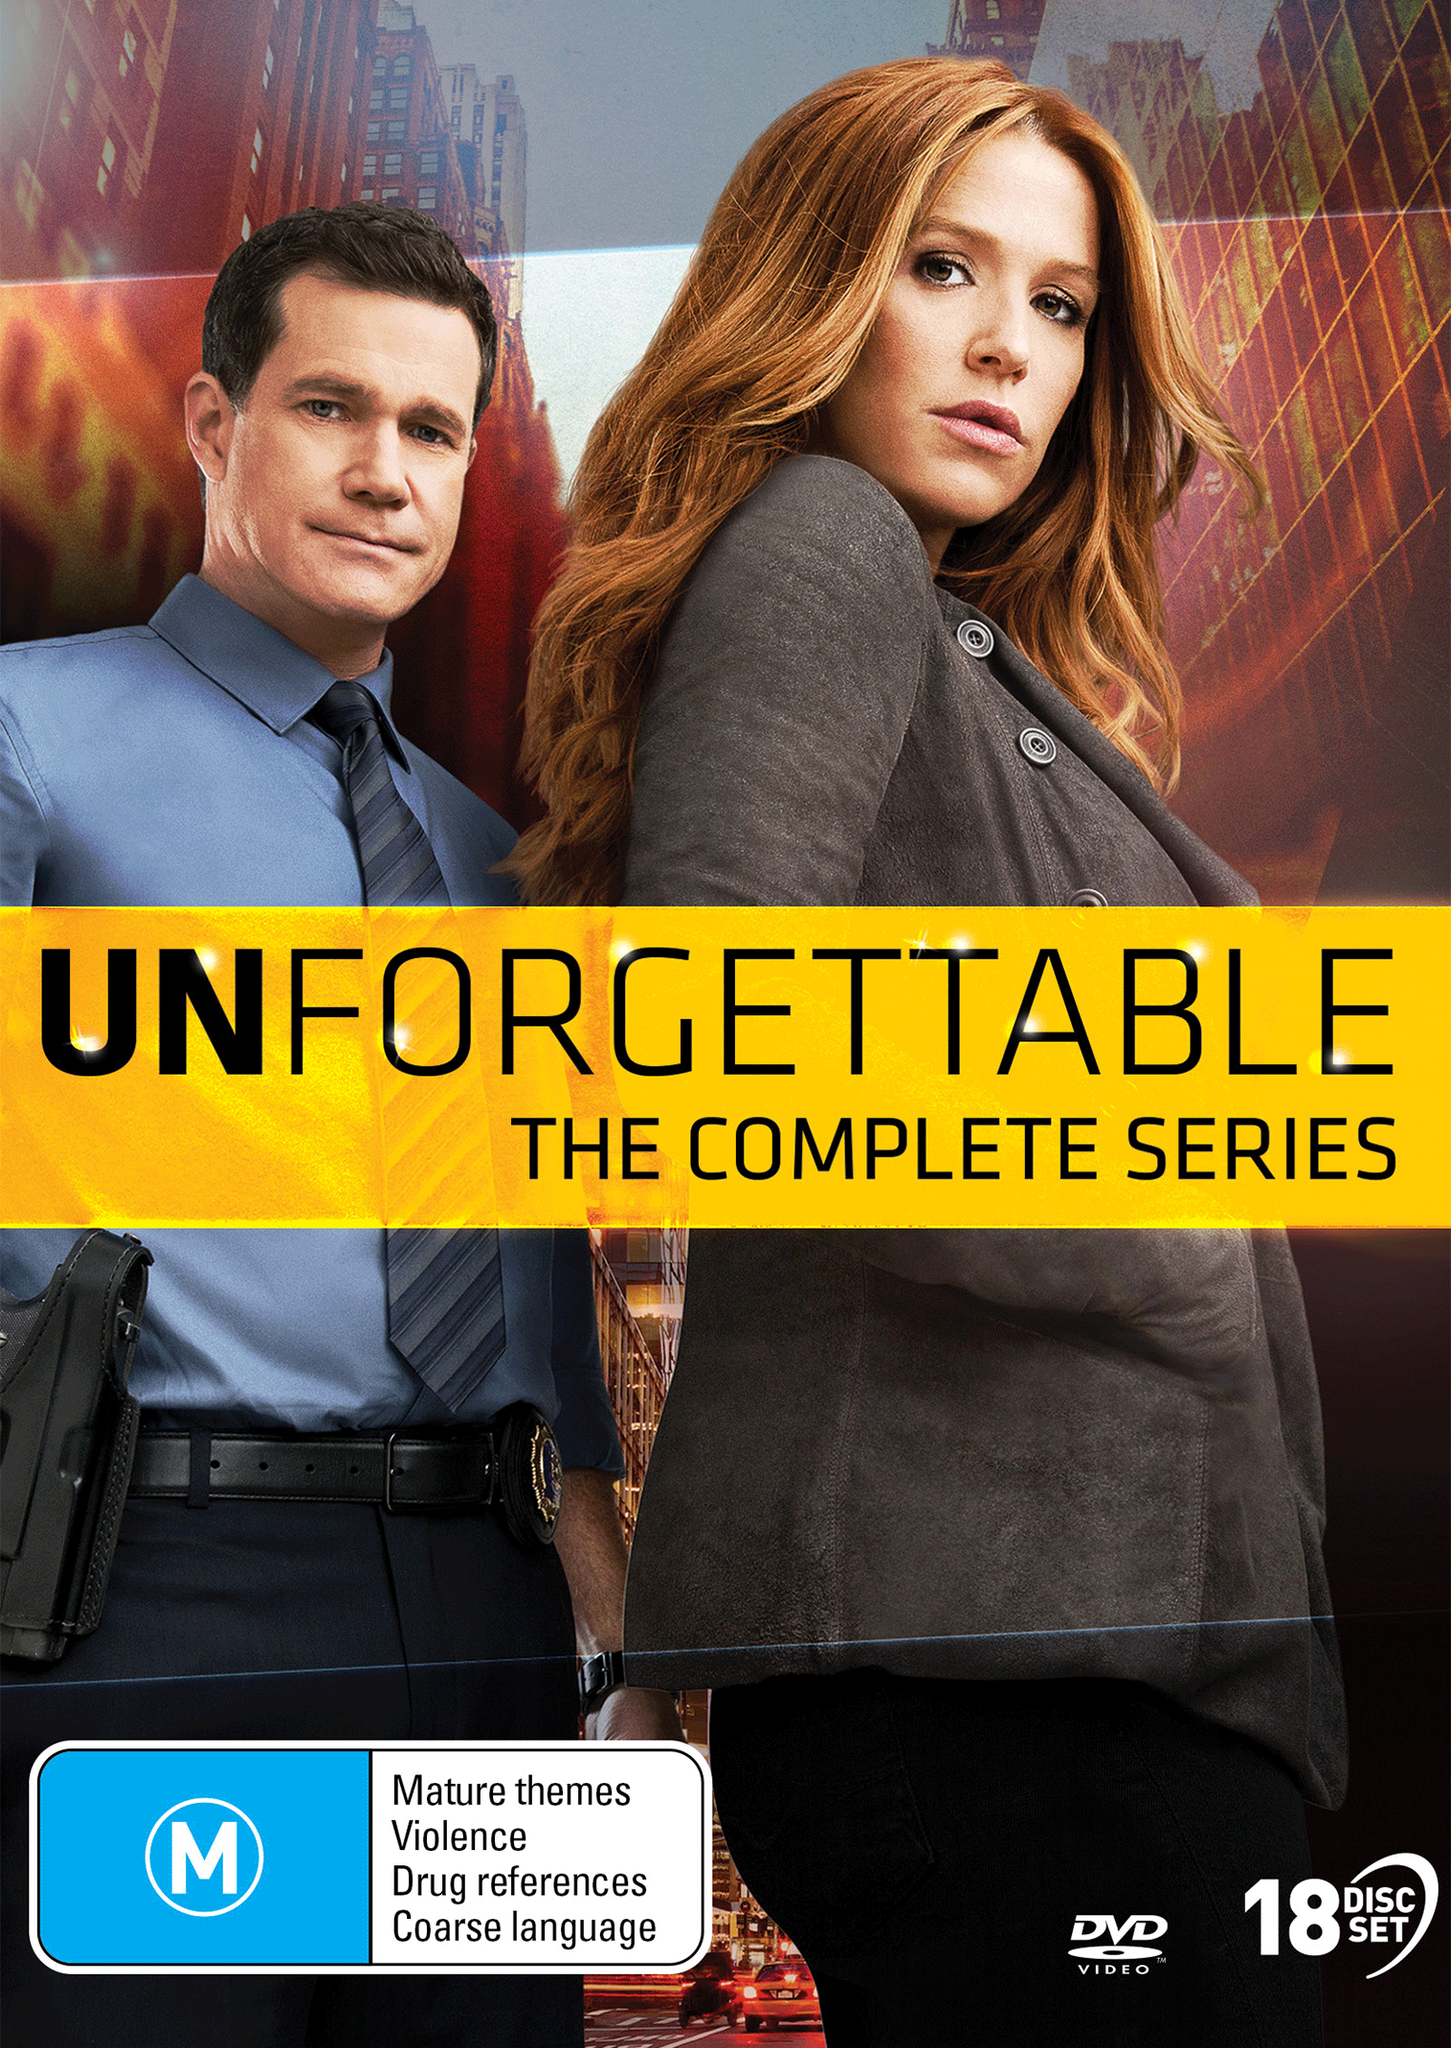 UNFORGETTABLE: THE COMPLETE SERIES